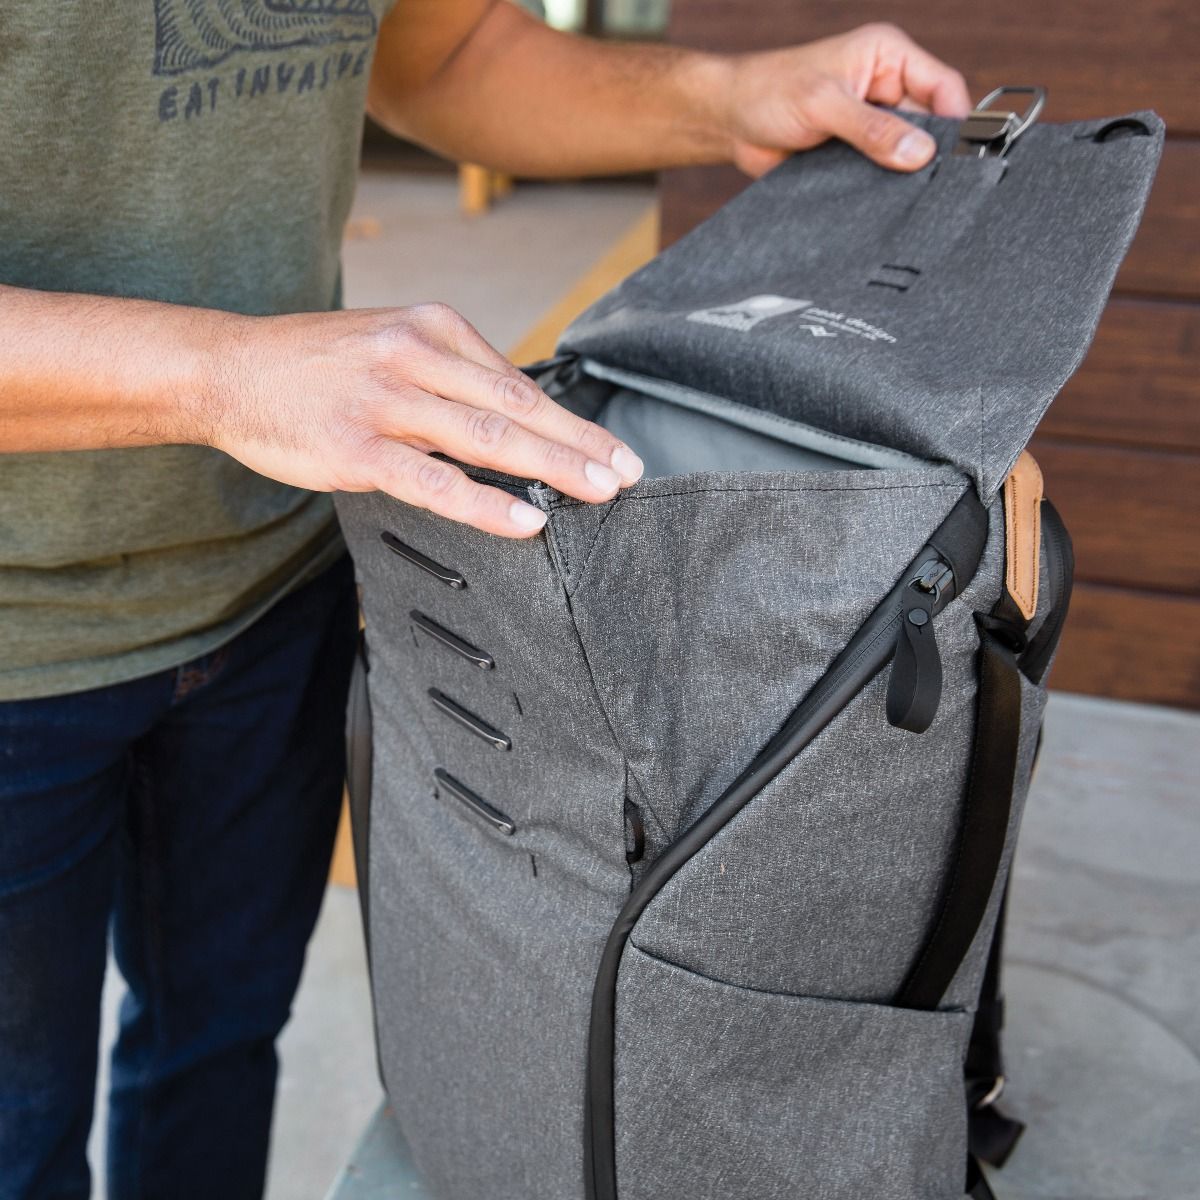 EVERYDAY BACKPACK 30L CHARCOAL